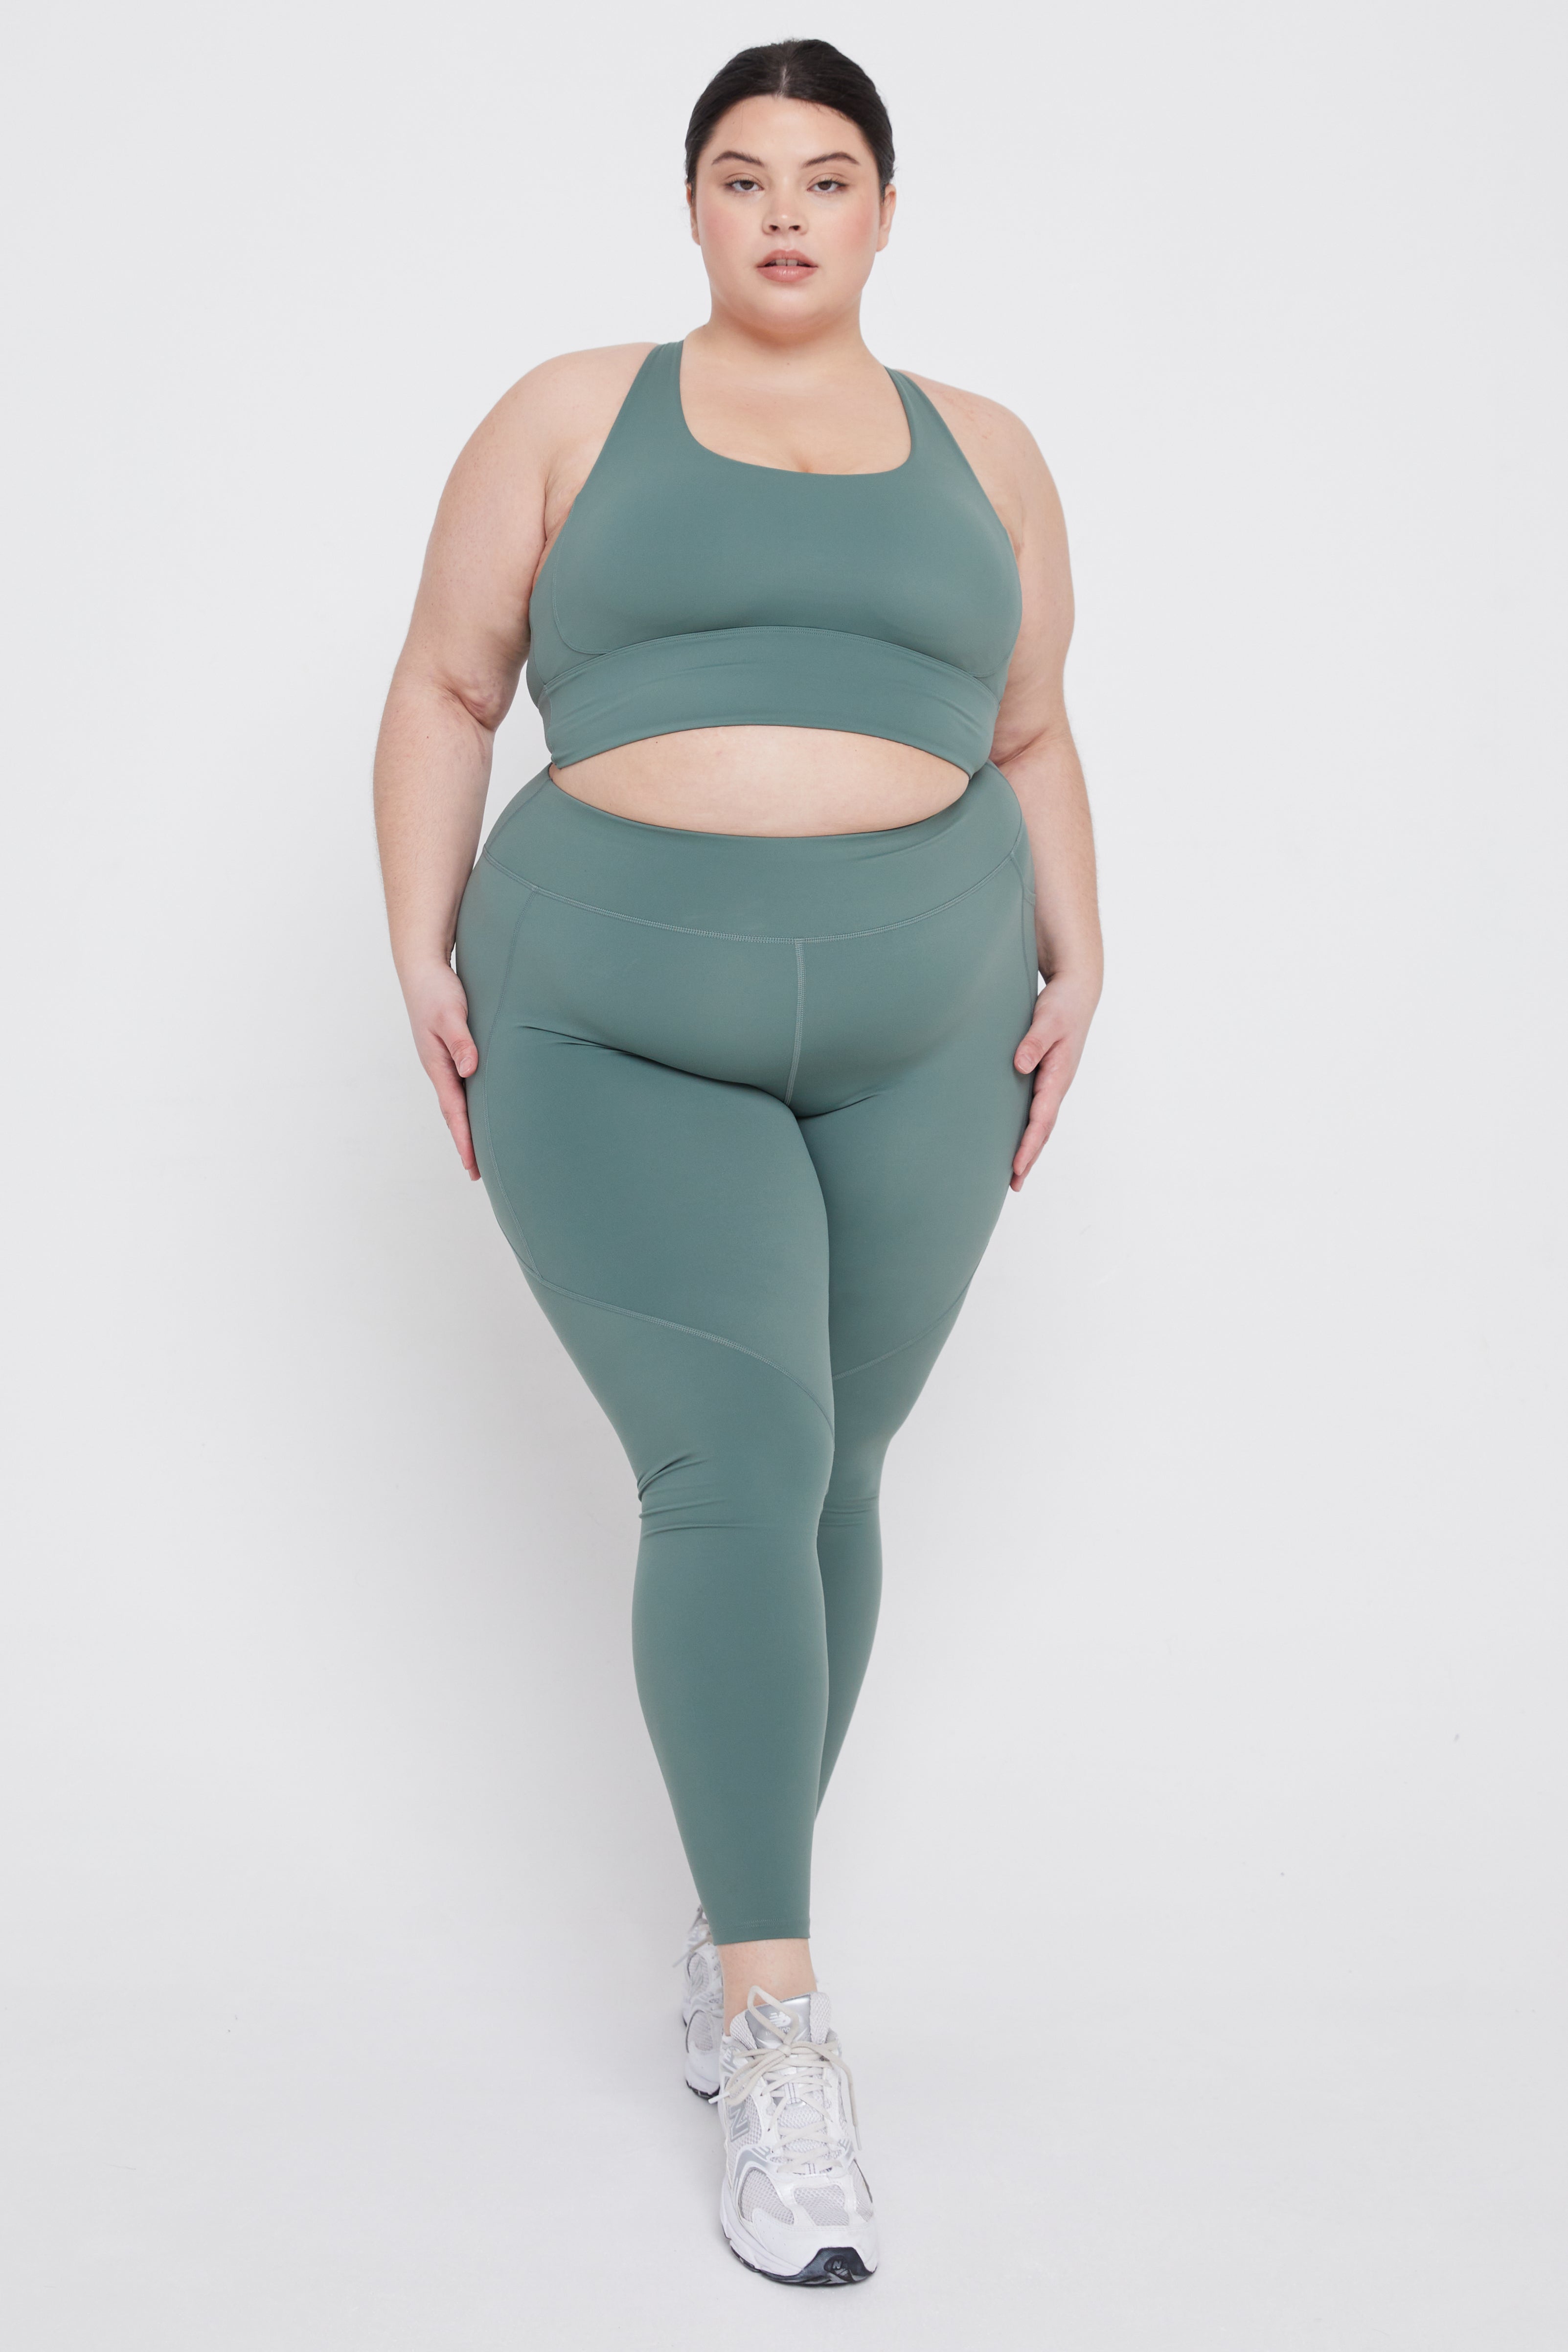 TALA Gym Wear Review & Size Guide: How Does TALA Activewear Fit